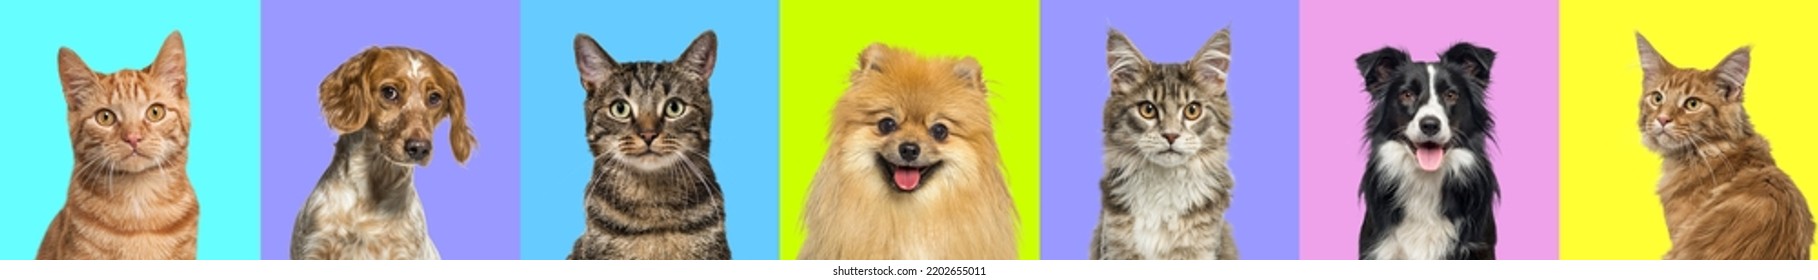 Collage of multiple headshot photos of dogs and cats on a multicolored background of a multitude of different bright colors. Banner - Shutterstock ID 2202655011